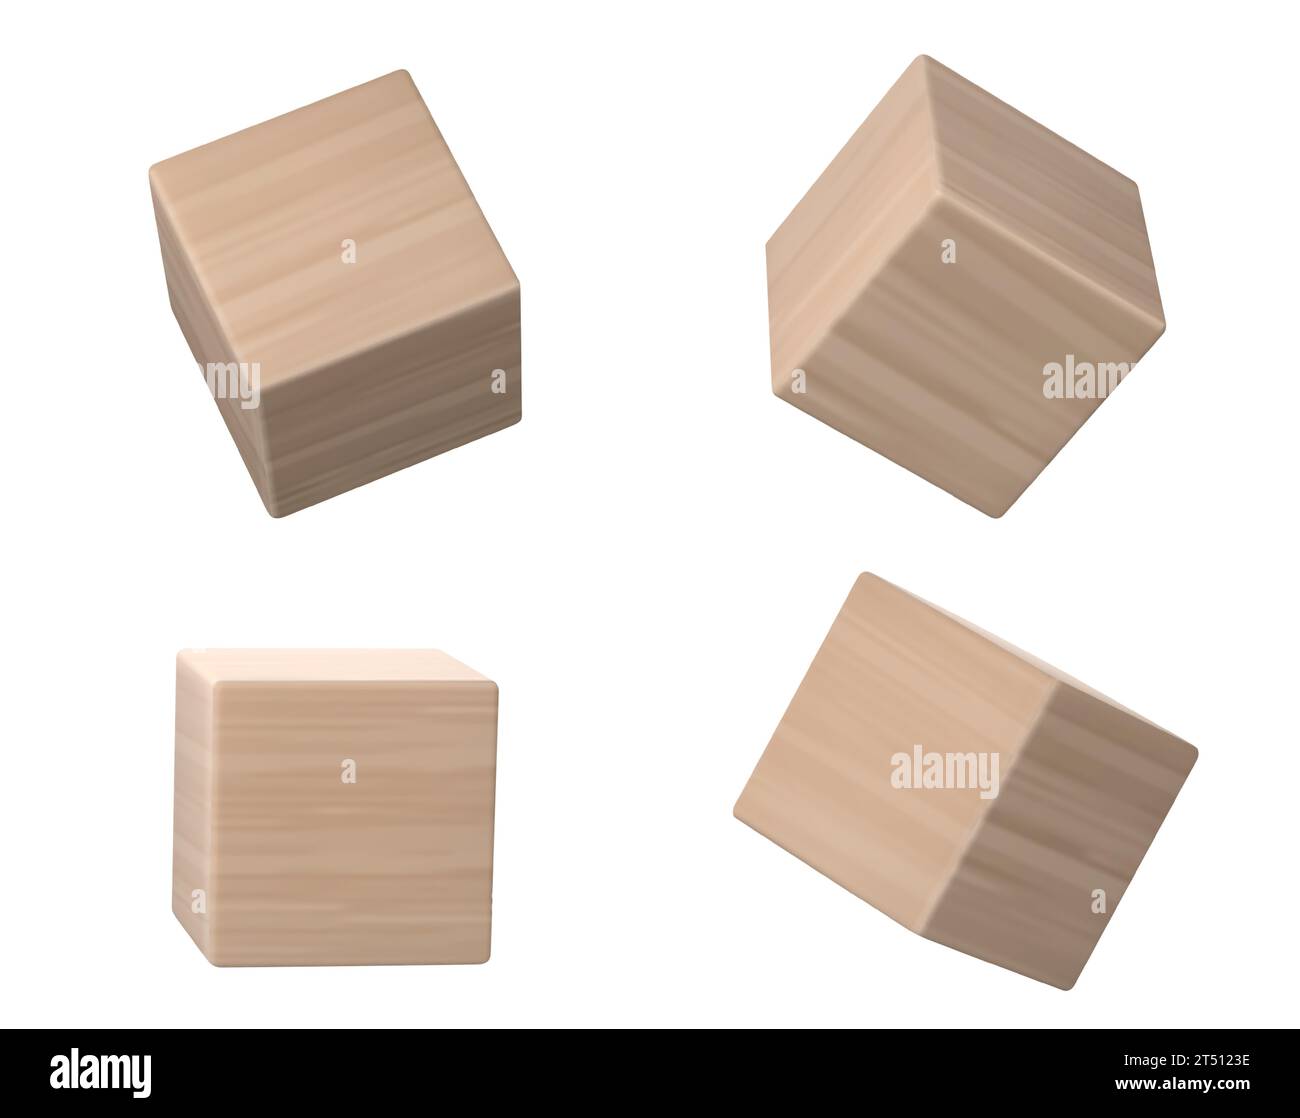 Wooden cube block for alphabet kids toy. 3d vector illustration of brown rectangular beam element with wood texture for child education and play. Mockup of timber square pieces in different angles Stock Vector